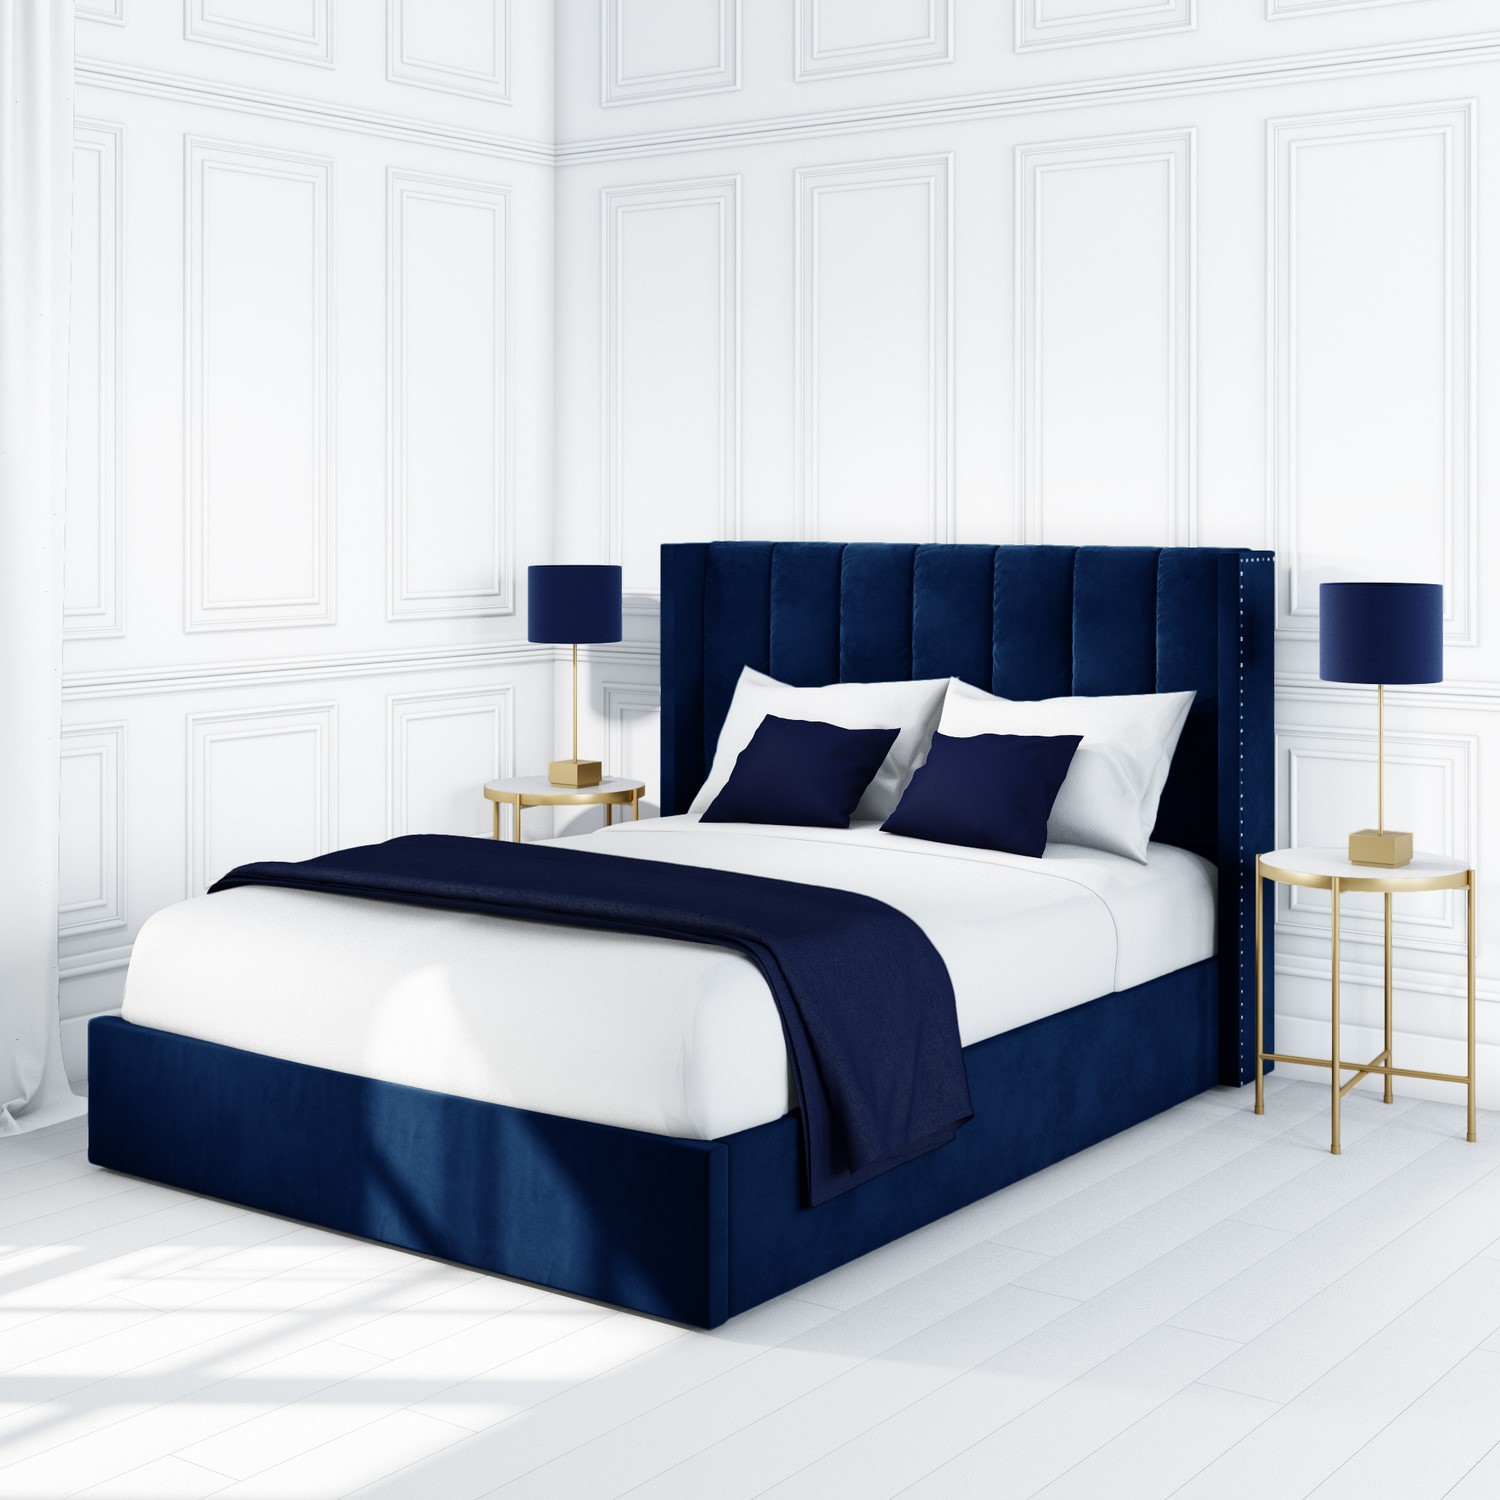 Maddox Wing Back King Size Ottoman Bed, Navy King Bed